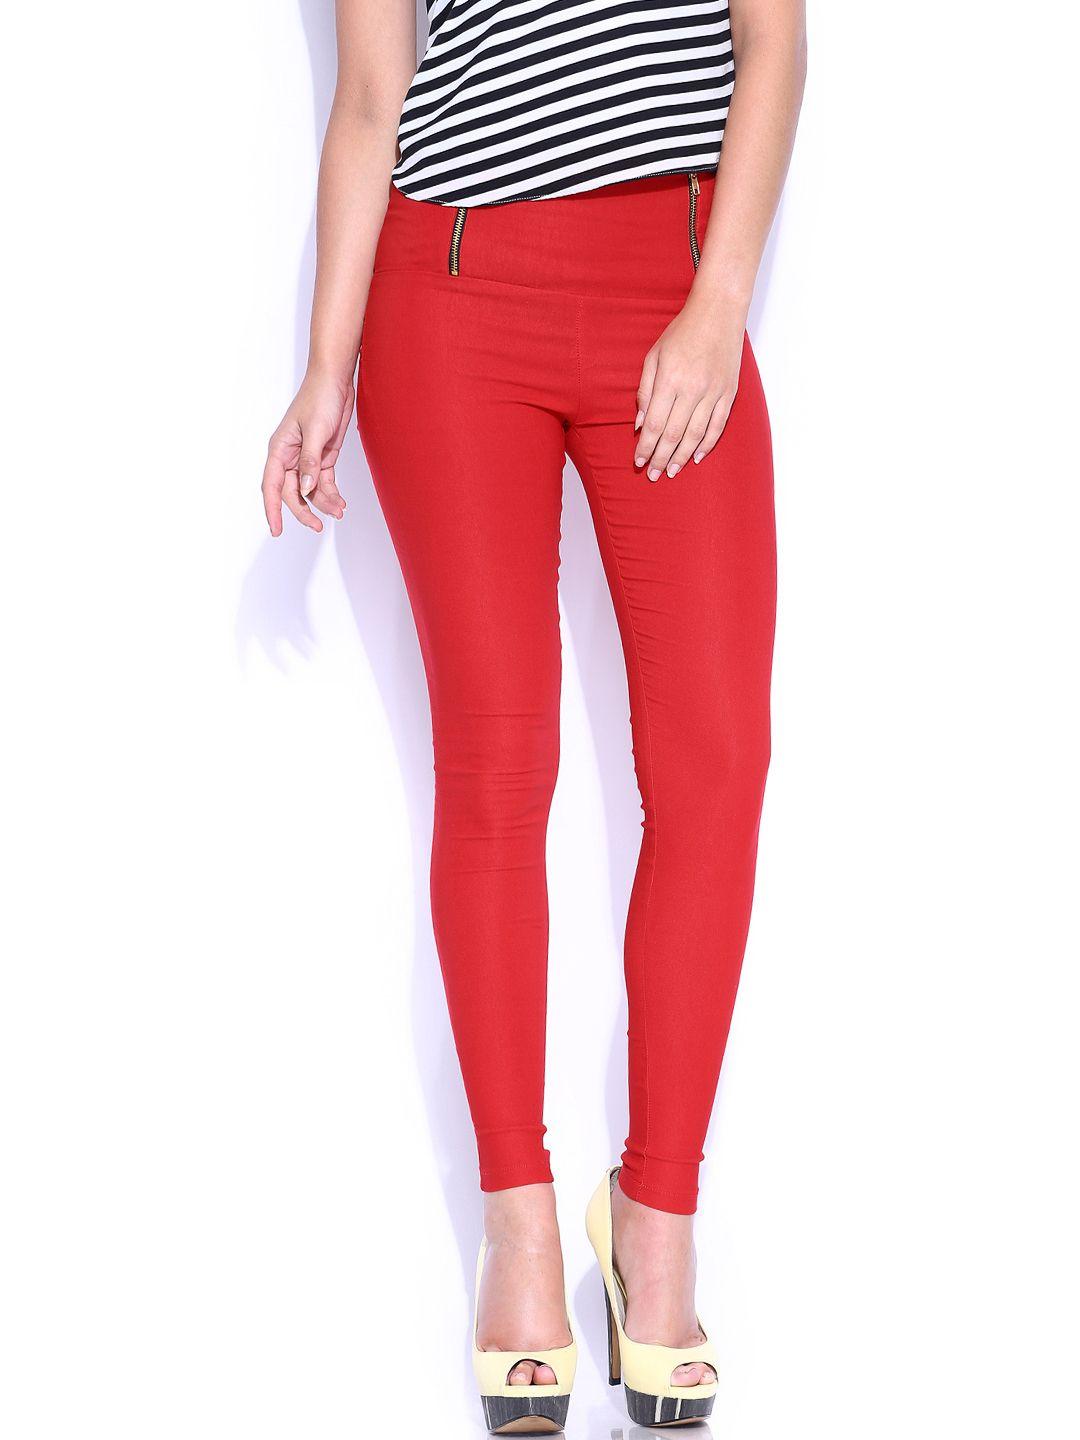 miss-chase-women-red-retro-jeggings